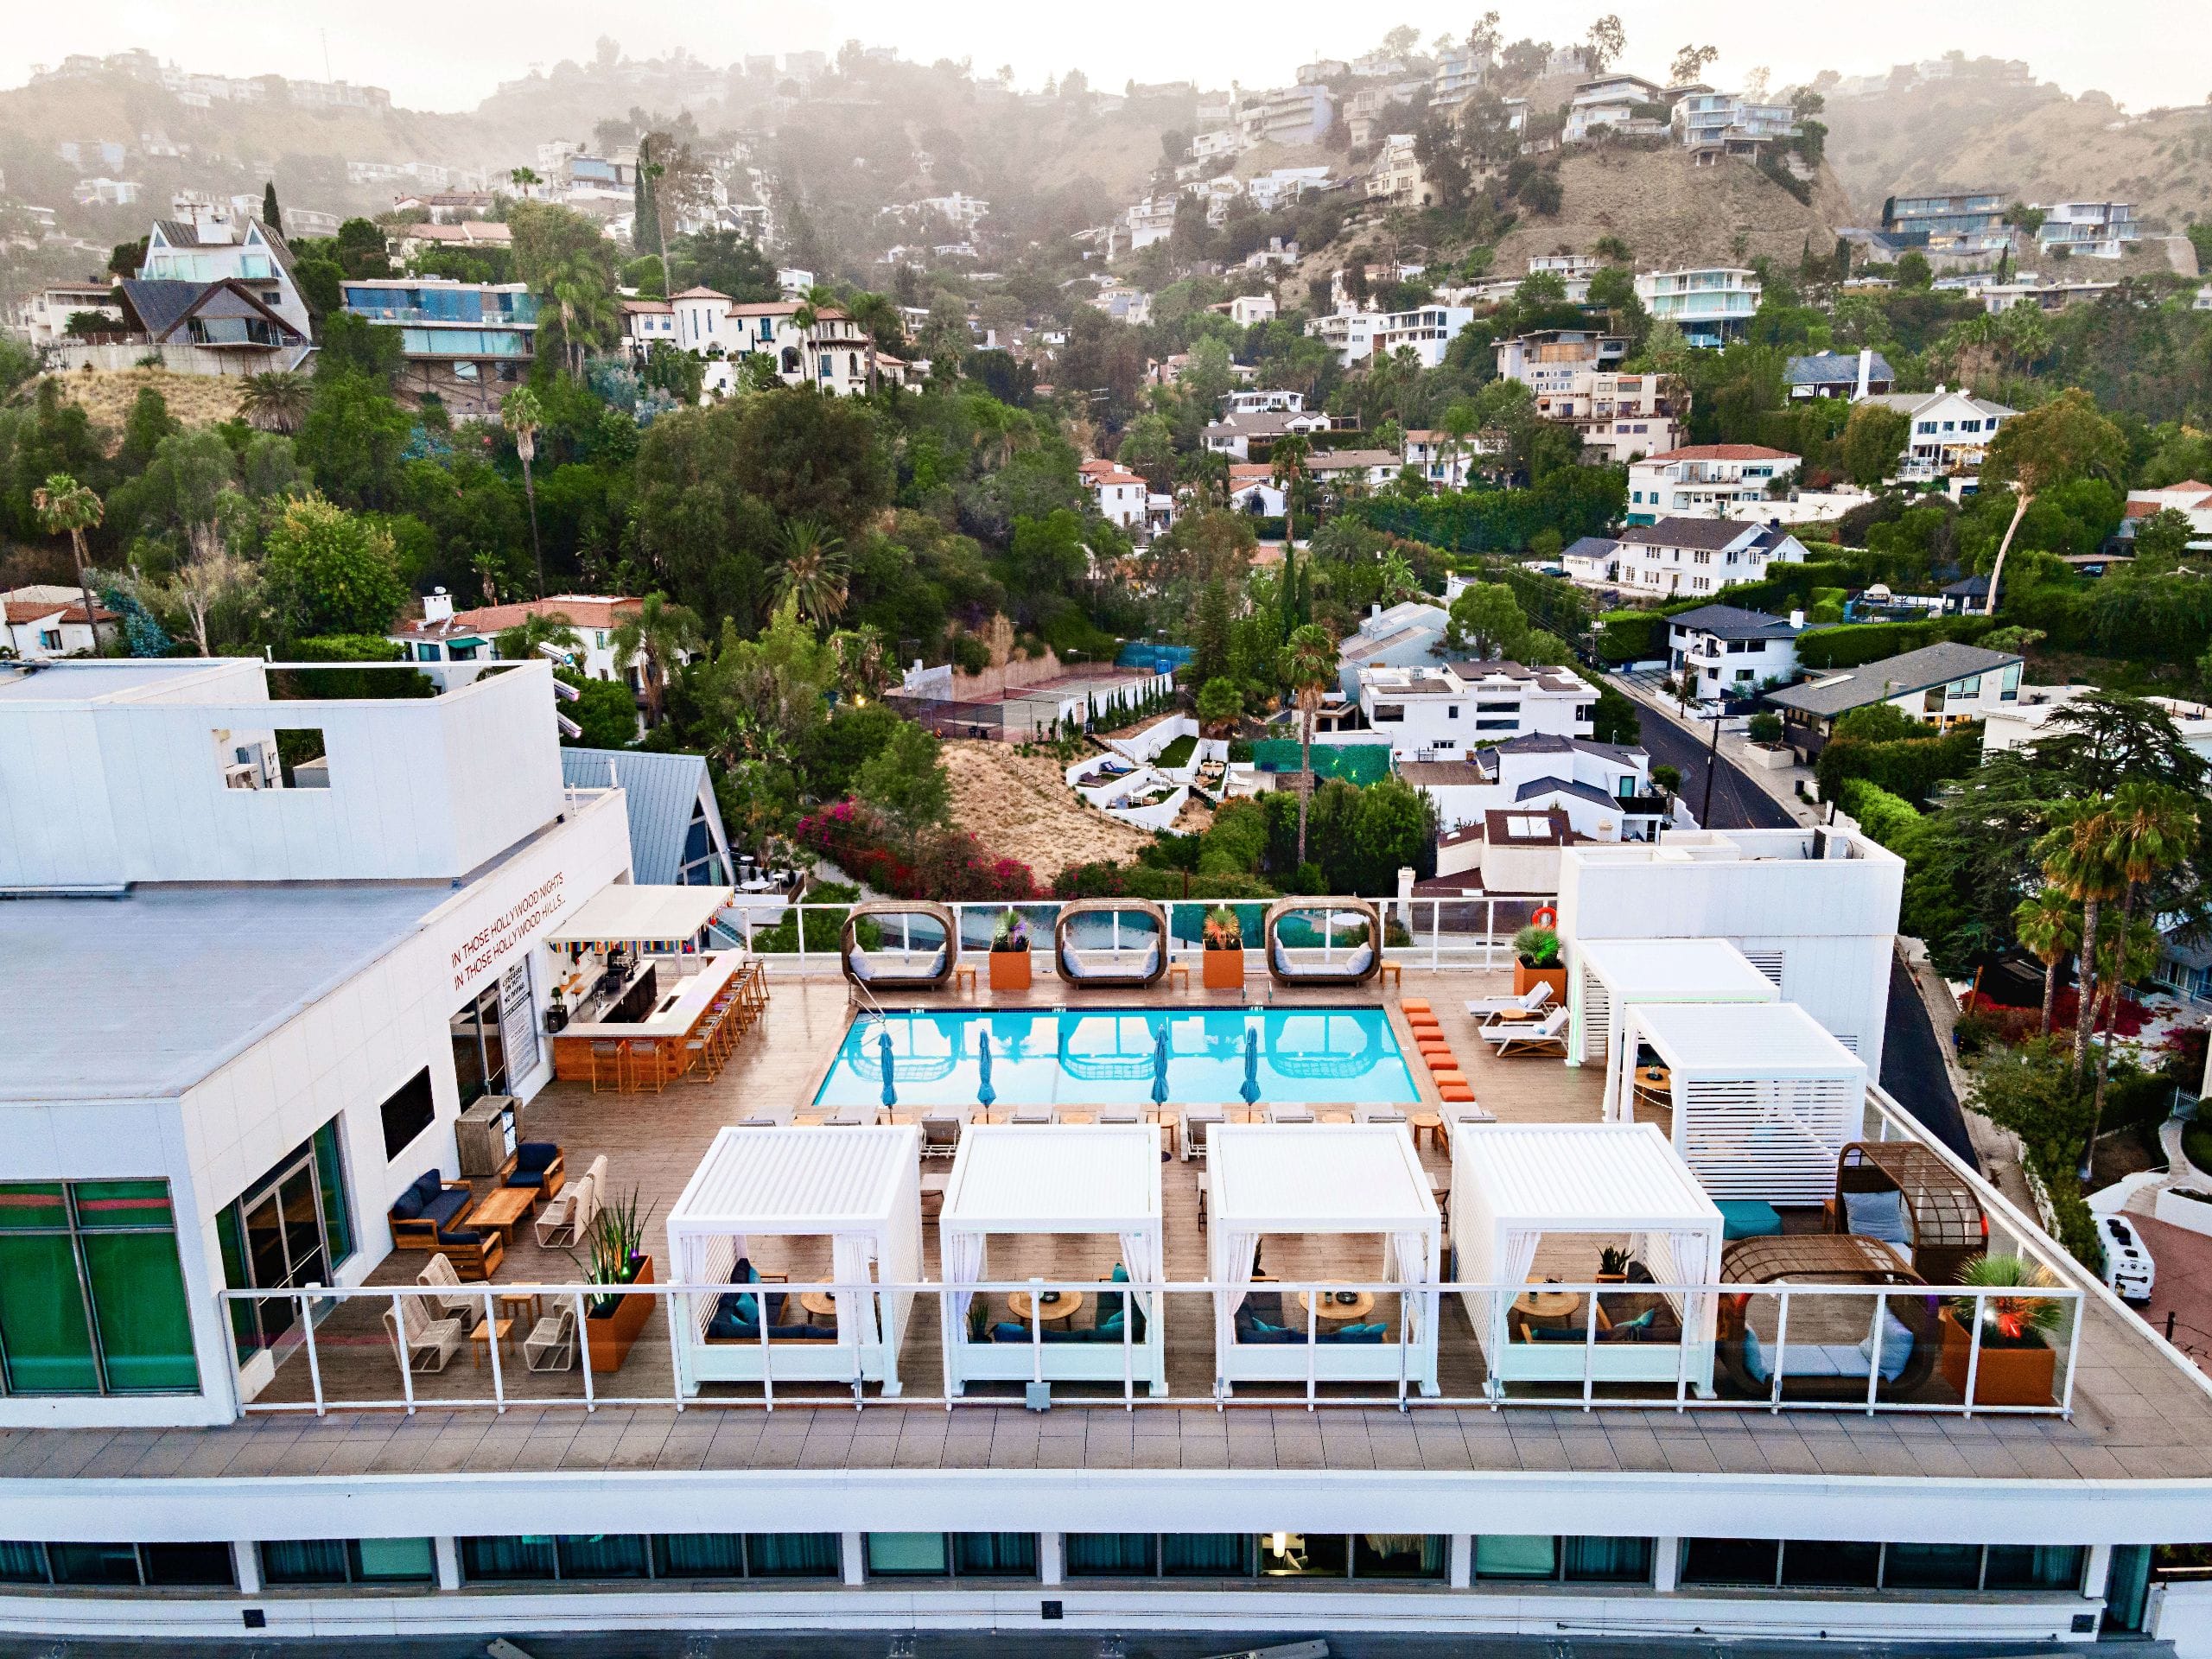 Andaz West Hollywood Rooftop Pool Deck Cabanas